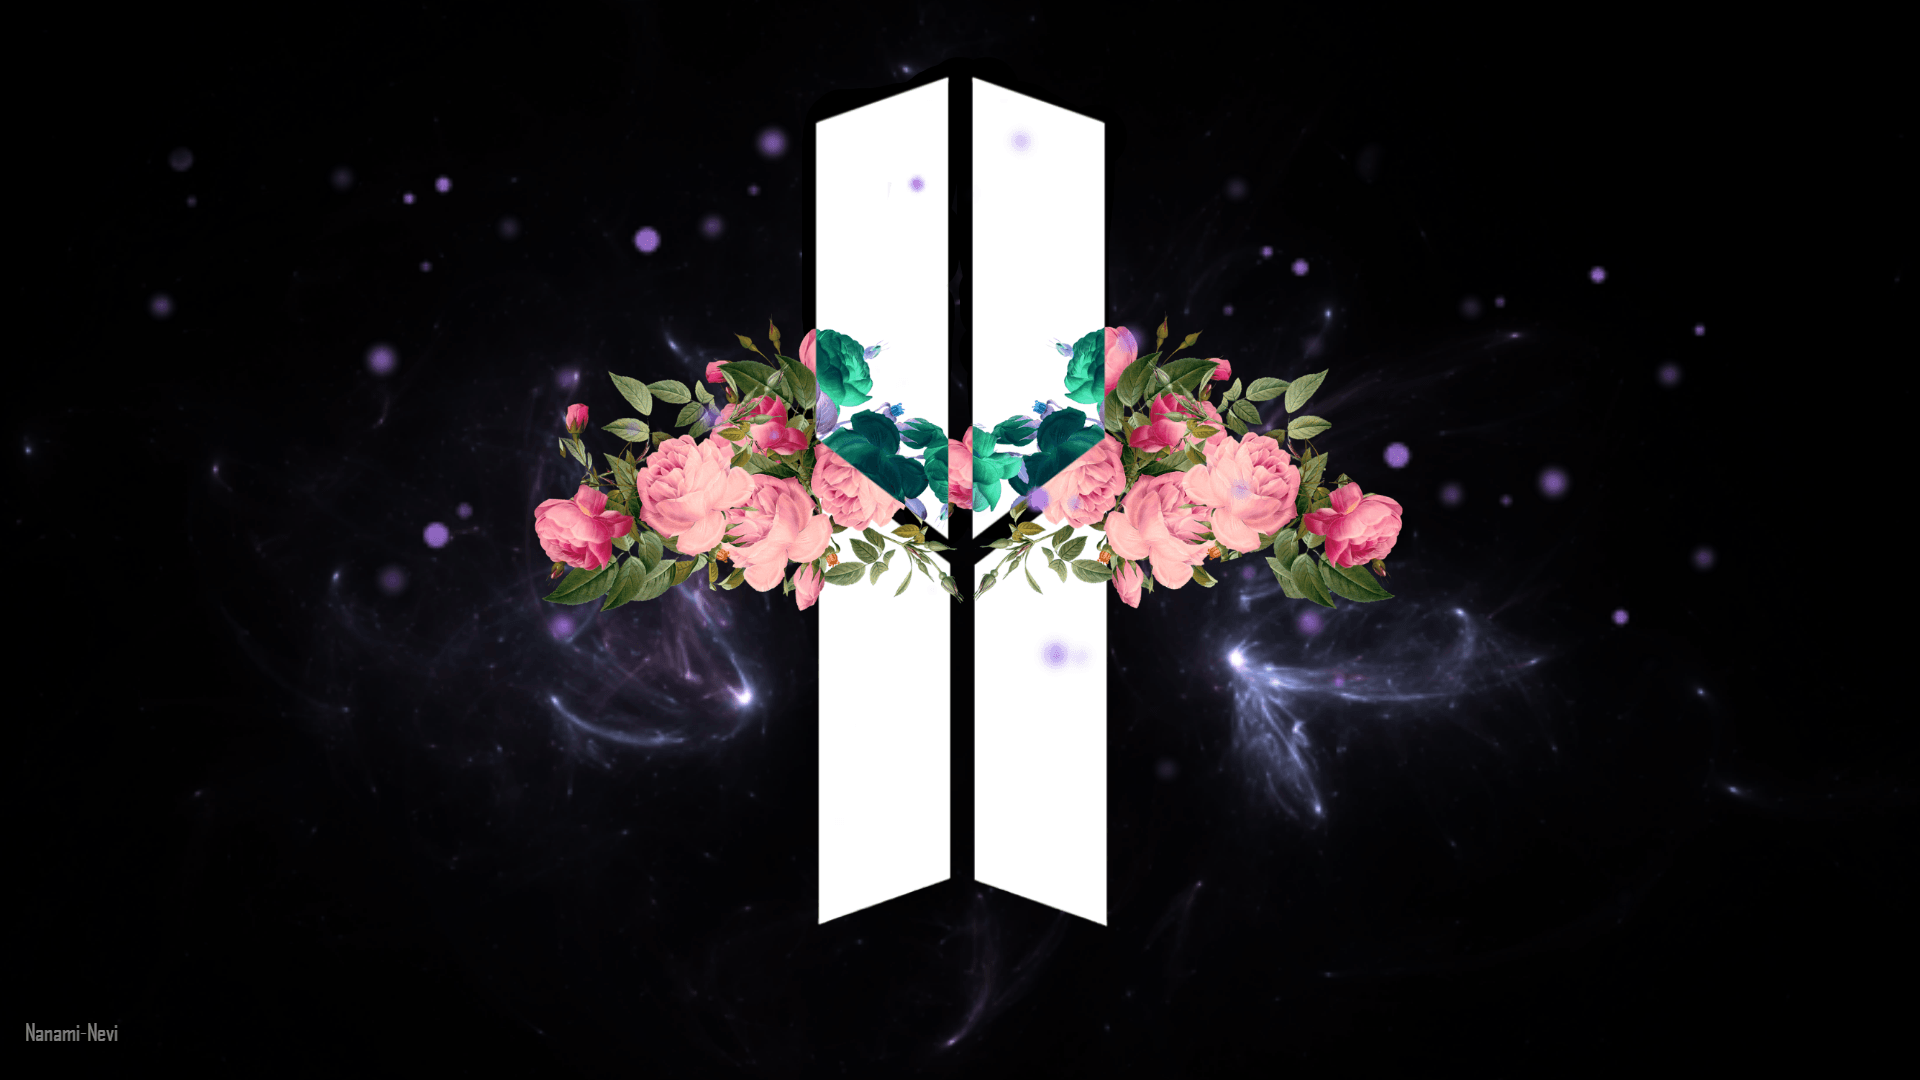 My creation for new BTS logo :) wallpaper PC 1920x1080. Bts wallpaper desktop, Bts laptop wallpaper, Wallpaper pc